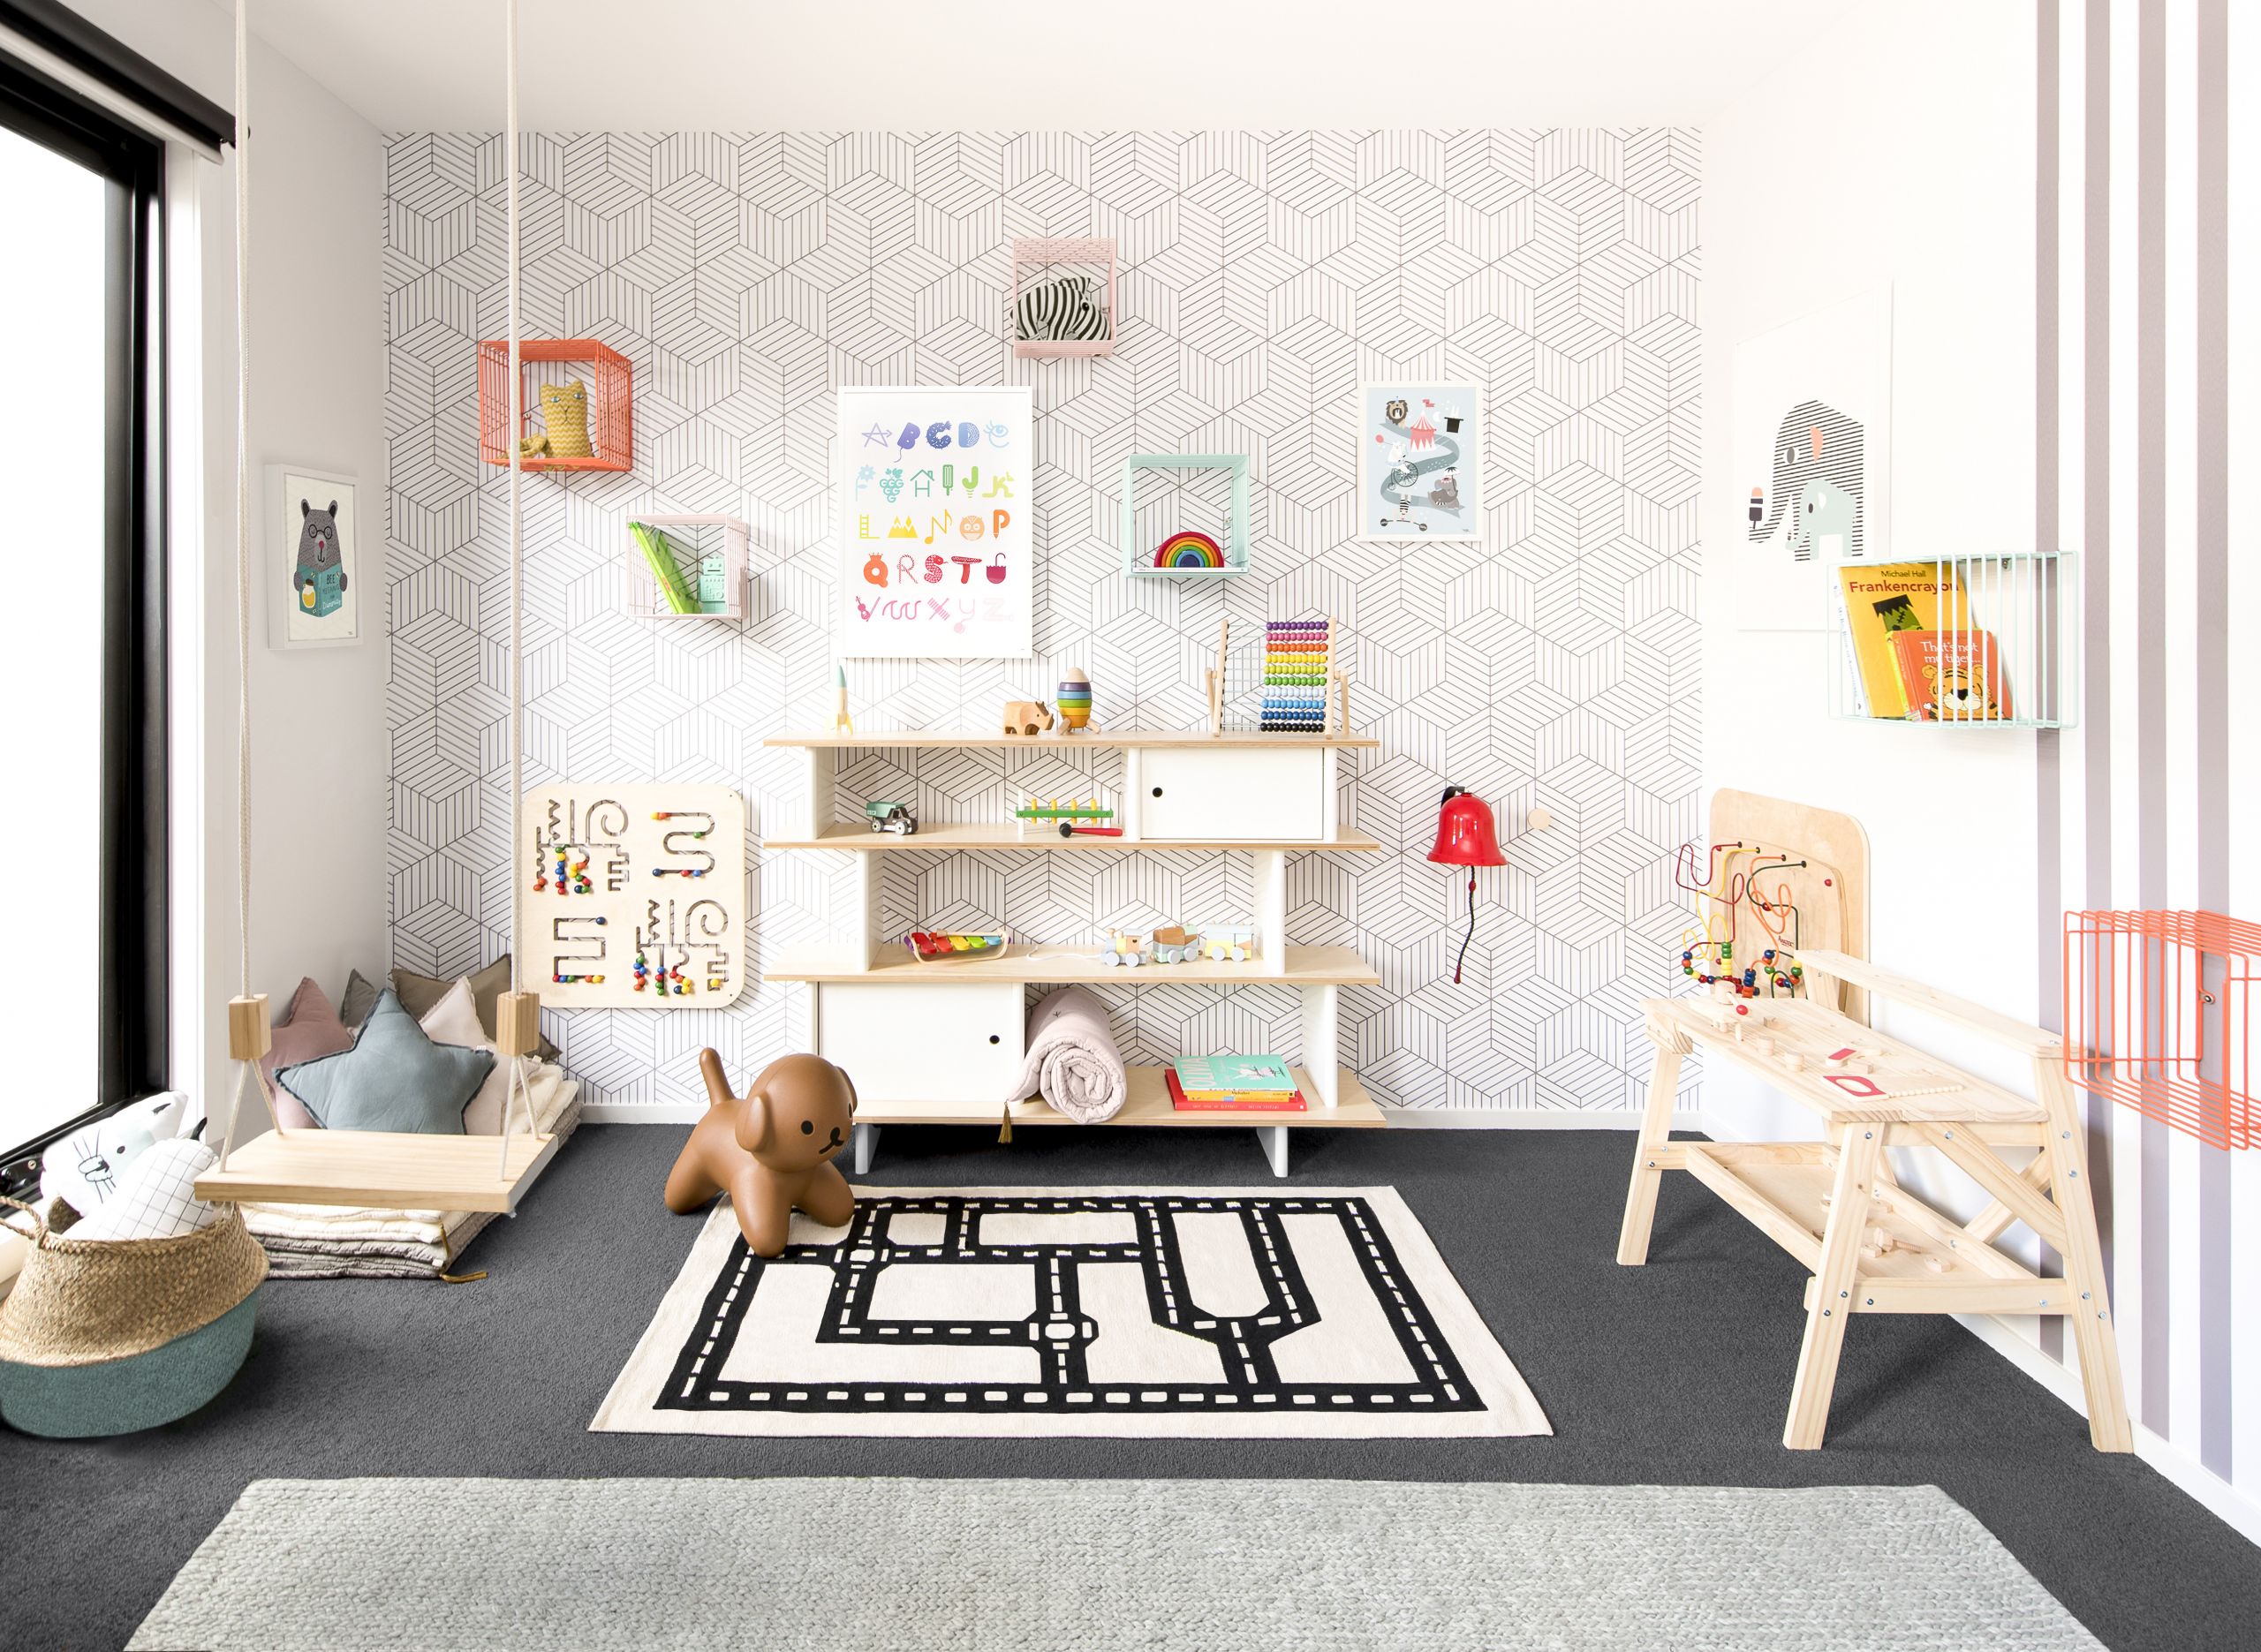 Kids Room Pinterest
 How to create and set up the ultimate playroom